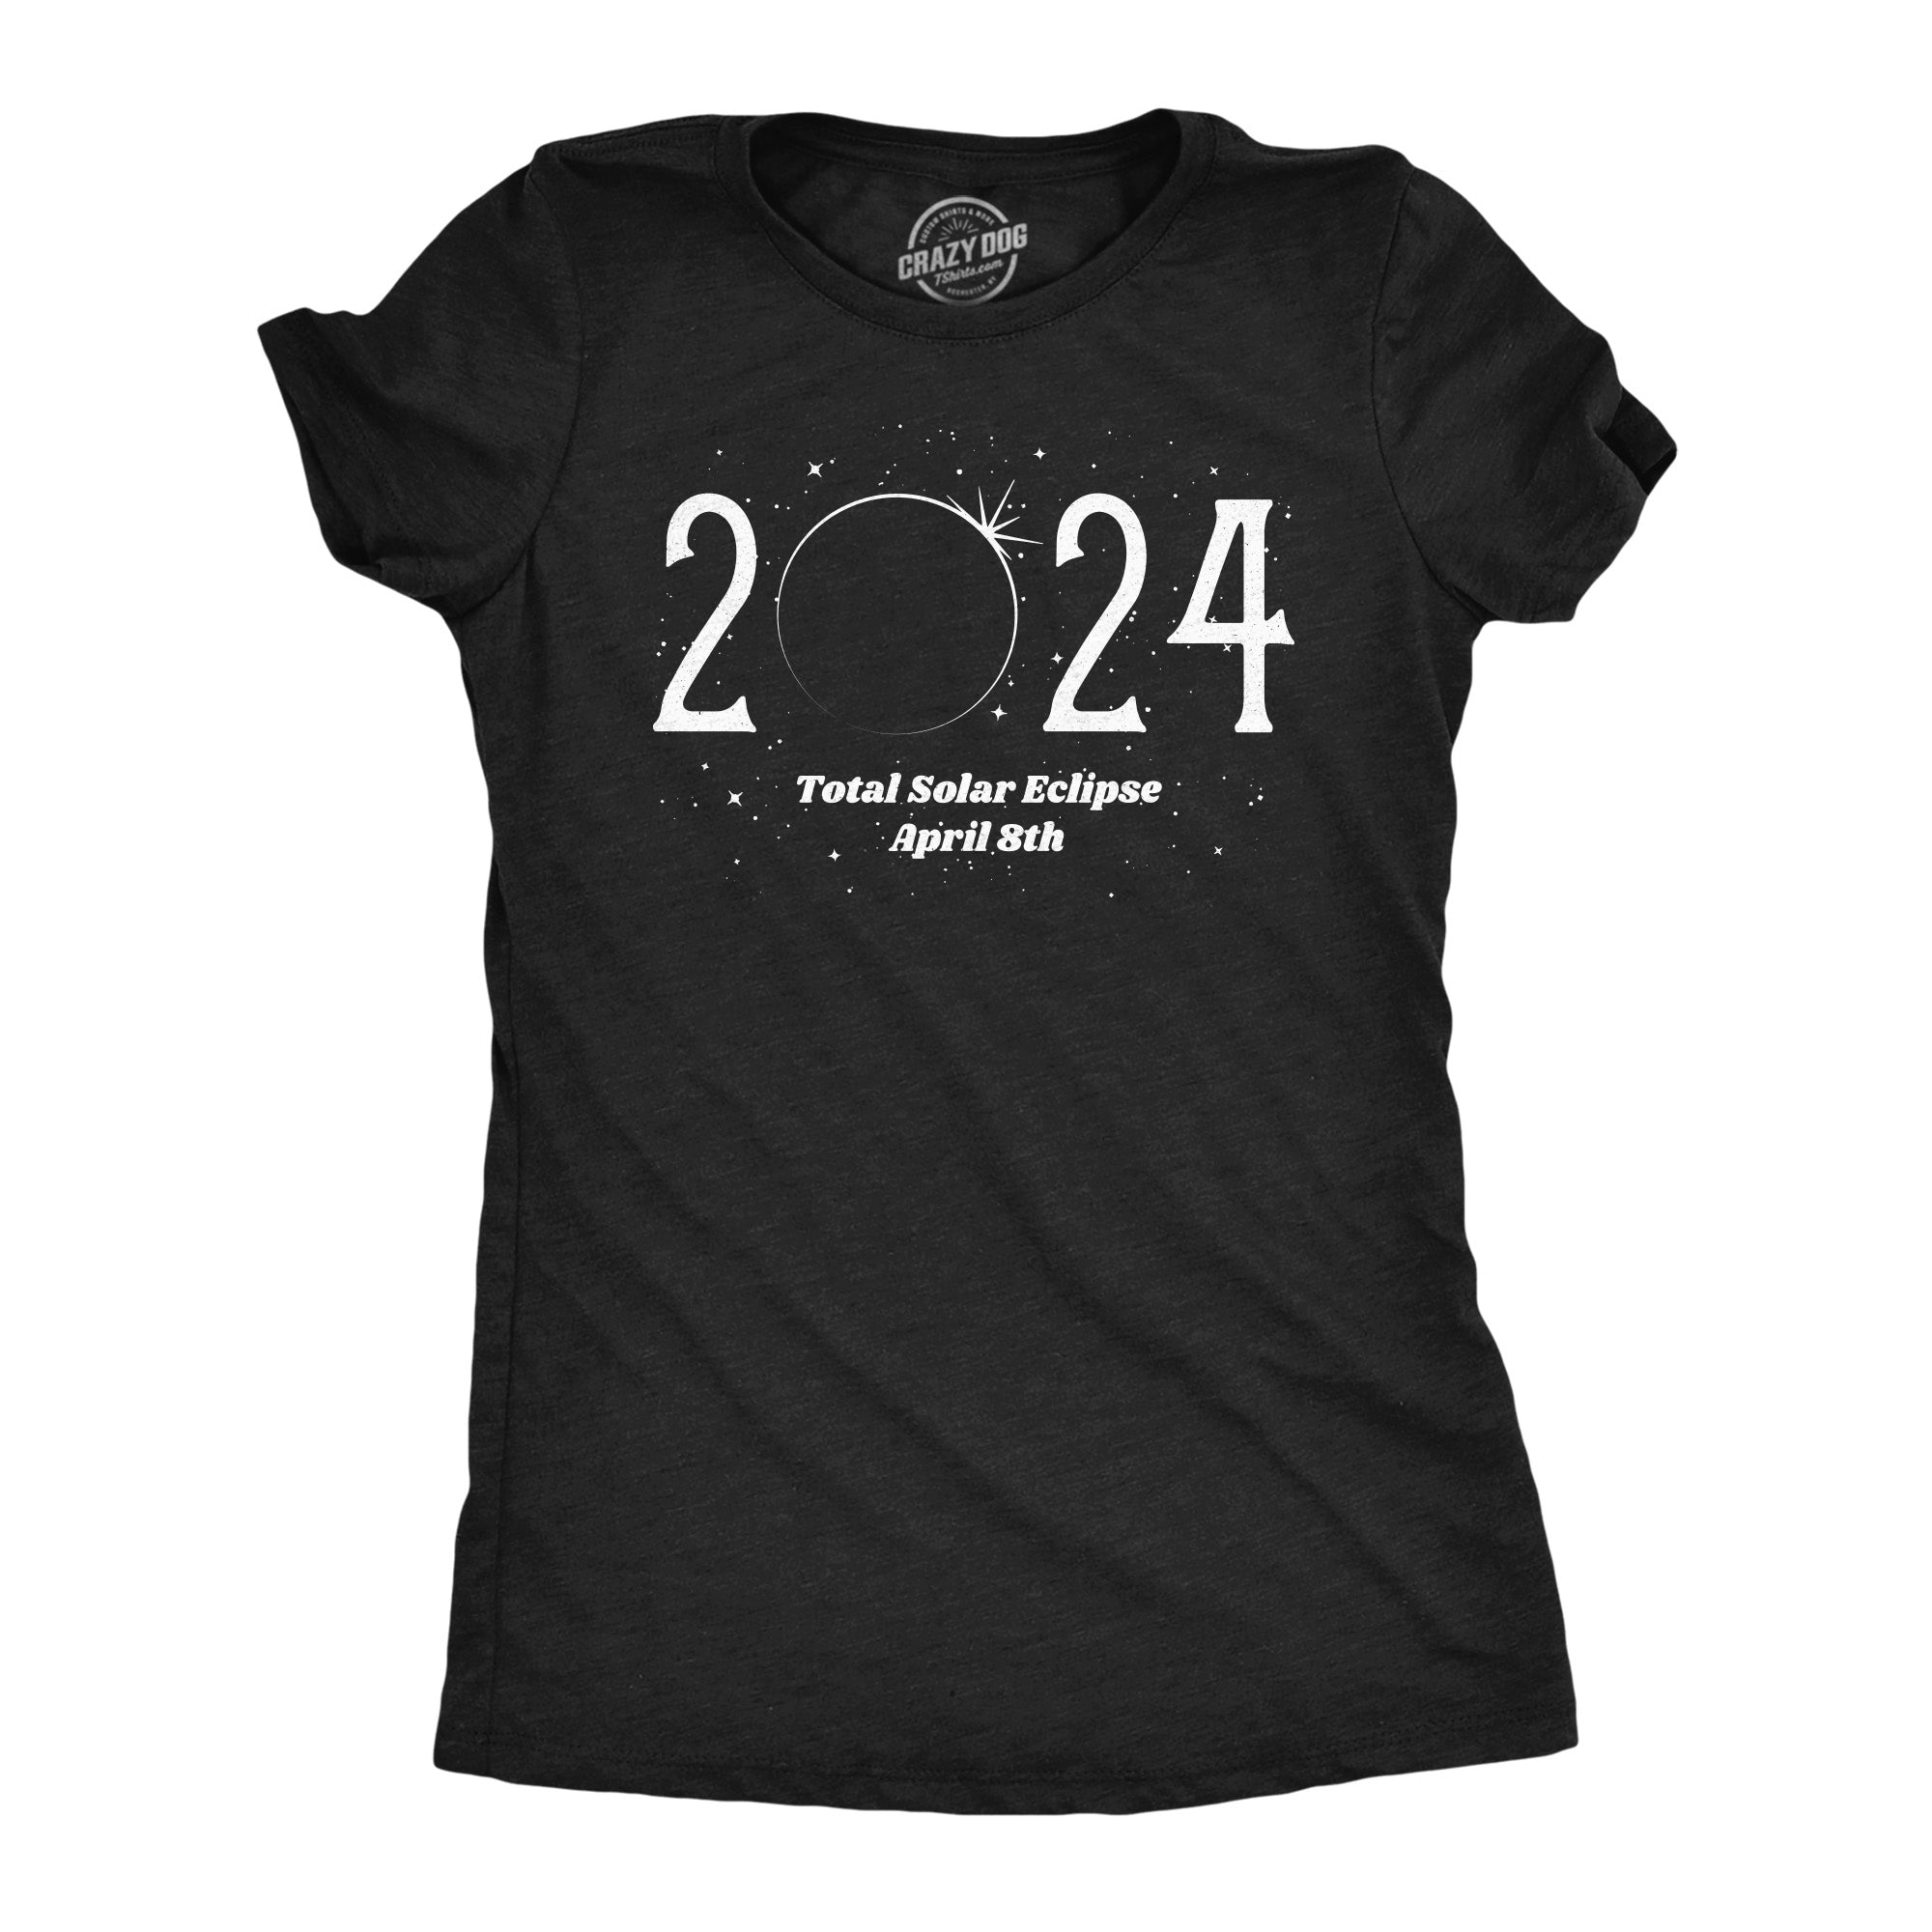 Funny Heather Black - 2024 Total Solar Eclipse 2024 Total Solar Eclipse Womens T Shirt Nerdy Space Tee